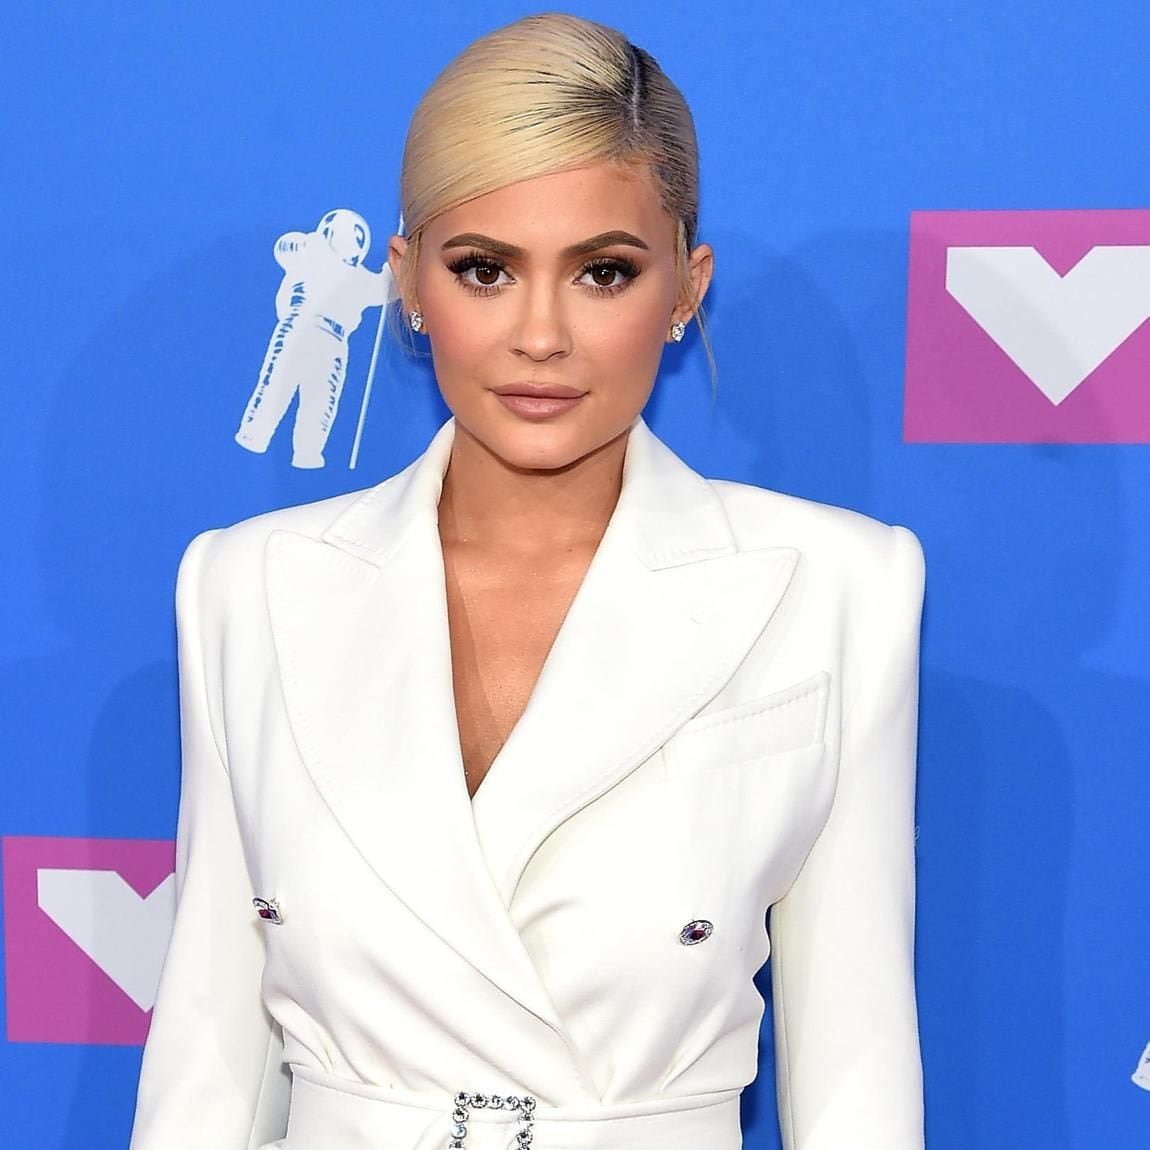 Kylie Jenner in a white suit with blonde hair in an up-do with a side part